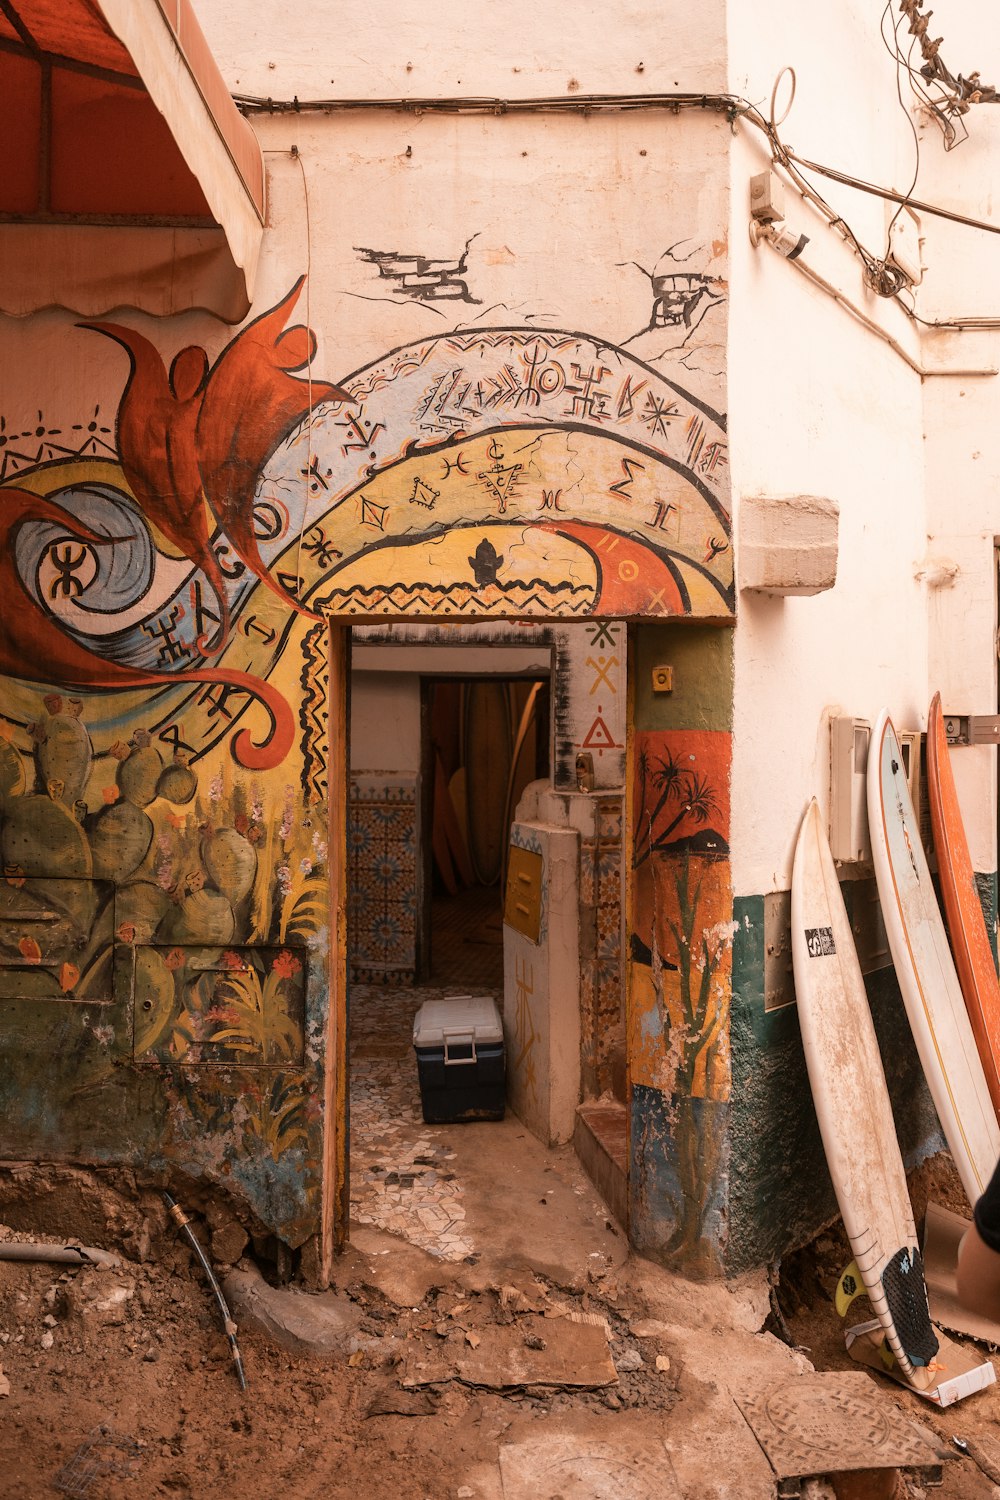 a room with graffiti on the walls